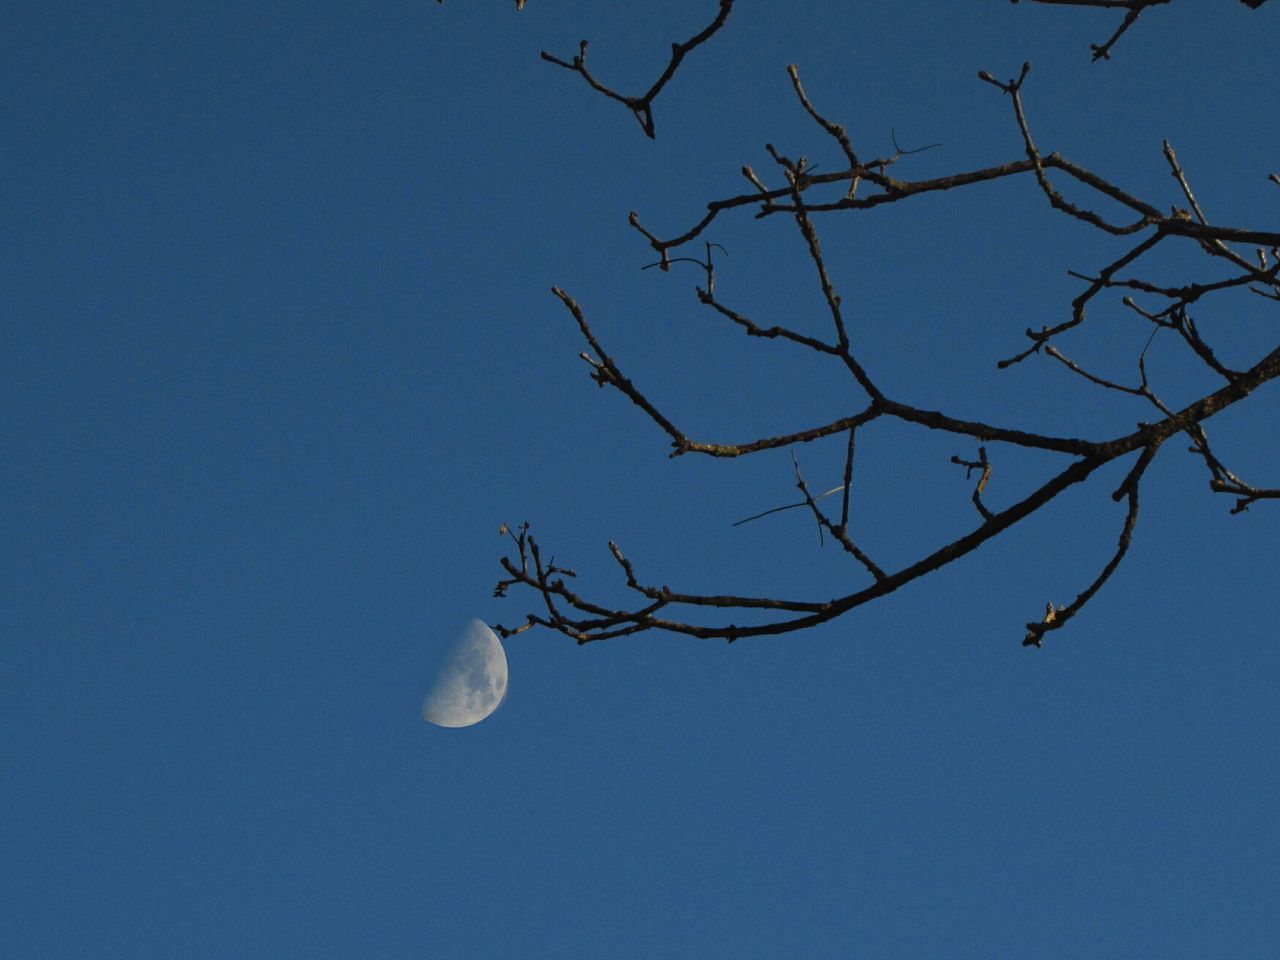 low angle view, tree, clear sky, bare tree, moon, branch, sky, blue, nature, beauty in nature, no people, outdoors, tranquil scene, tranquility, close-up, day, astronomy